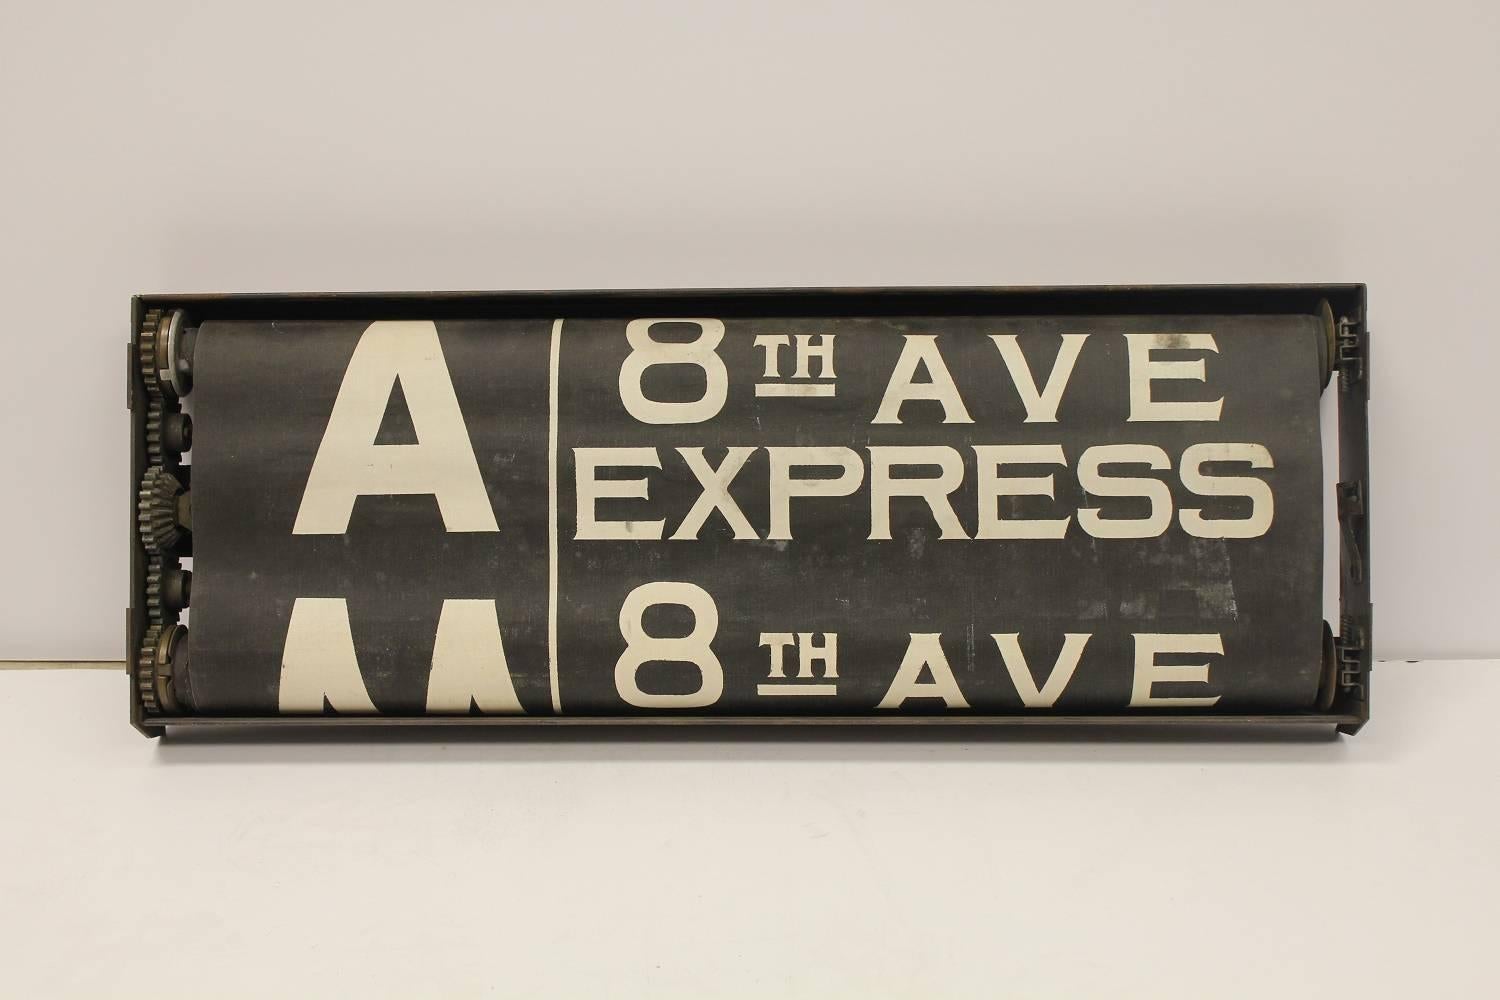 Early 20th century New York City train schedule sign with original metal frame.